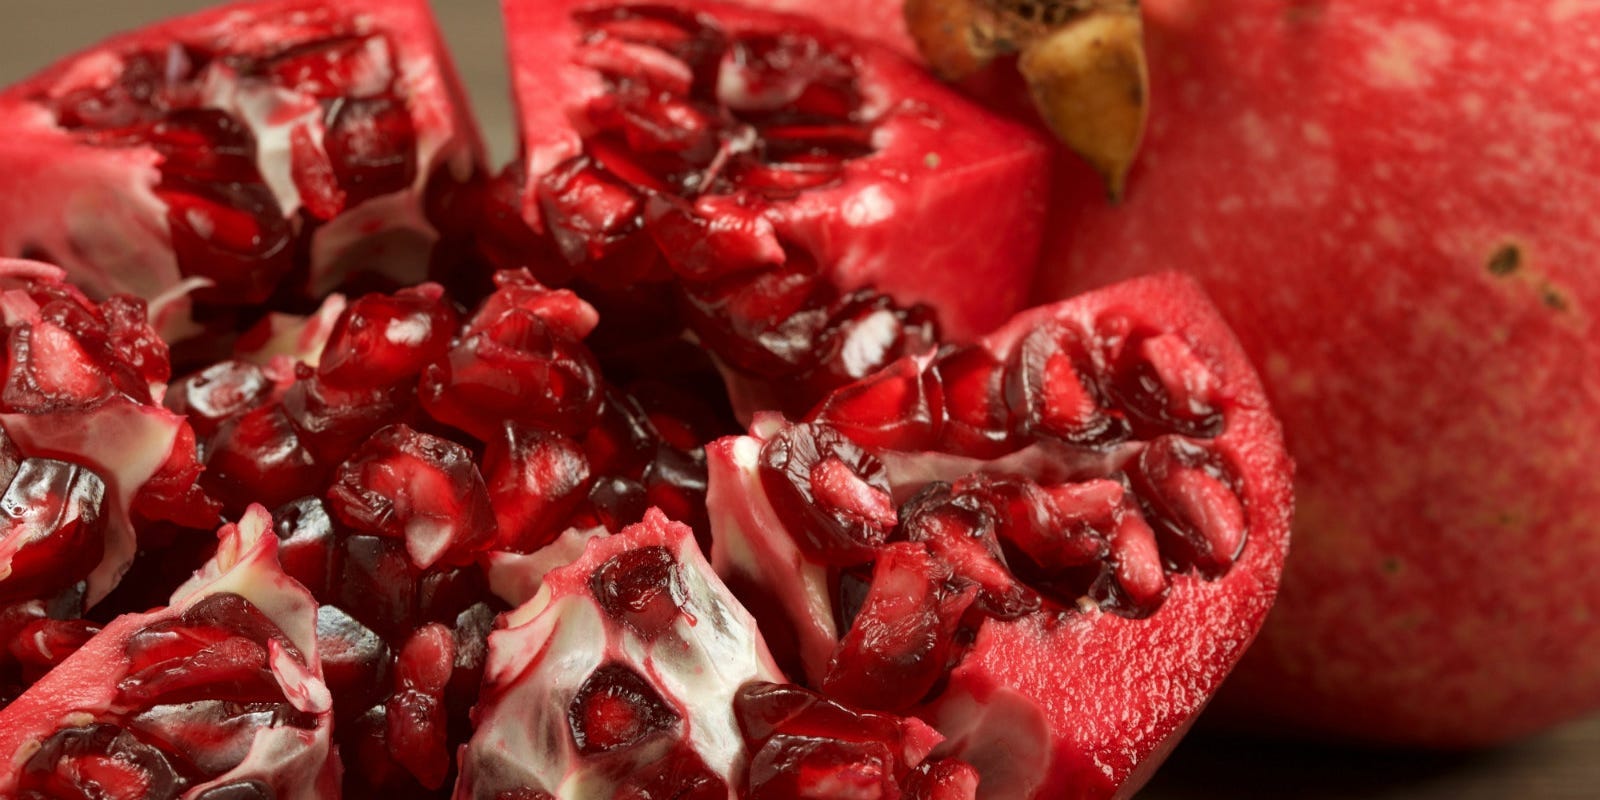 In Turkey and Armenia, pomegranates are thrown for good luck on New Year's Eve.